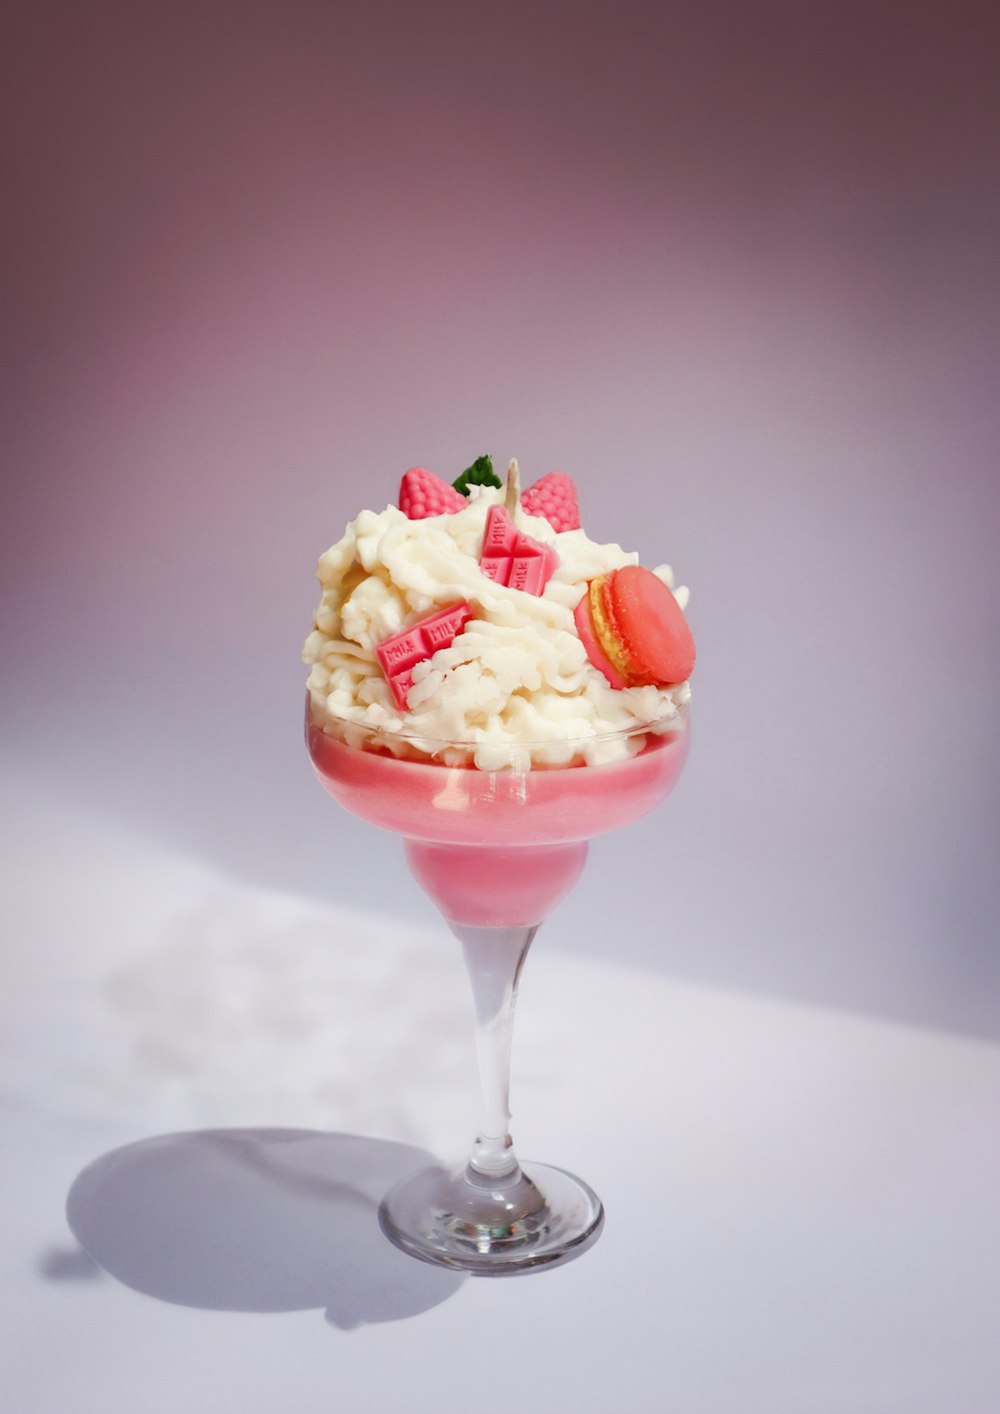 a dessert sundae with strawberries and whipped cream